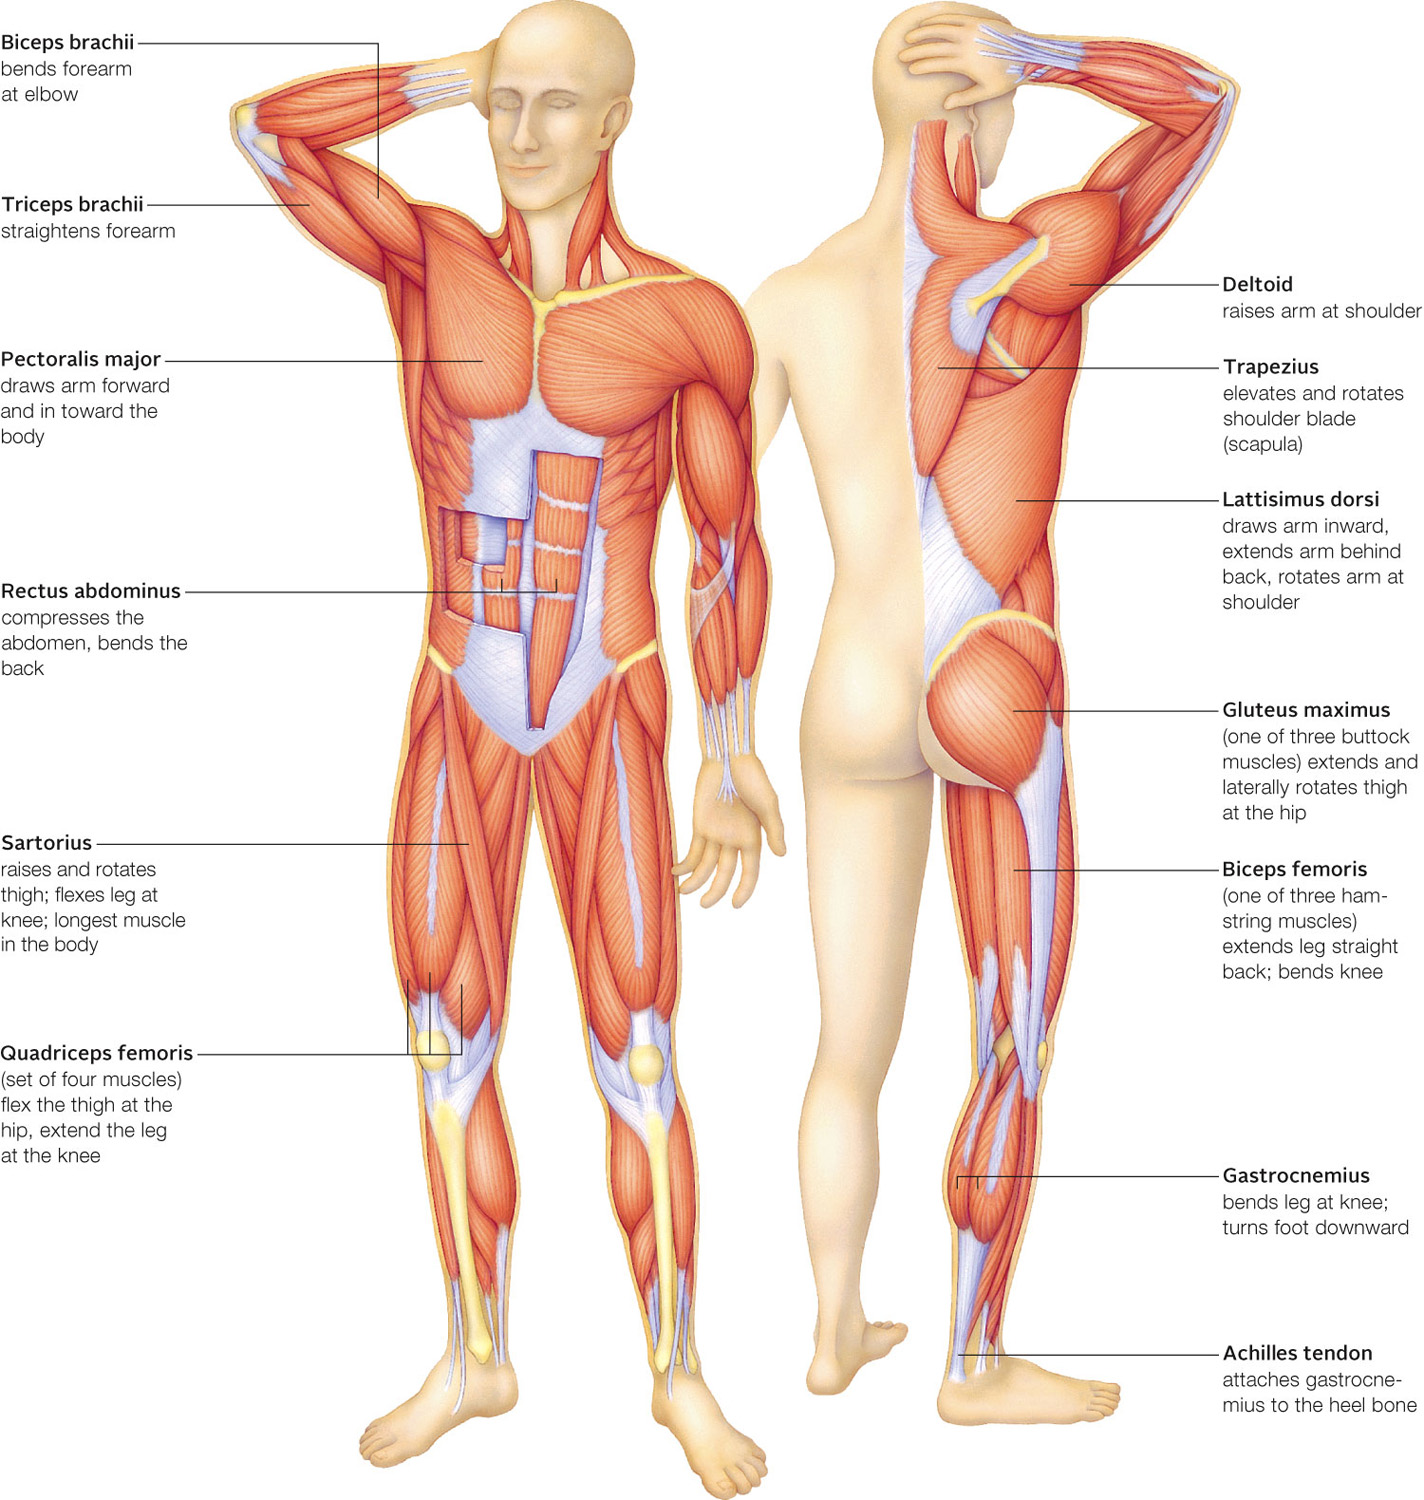 Major muscles of the human musculoskeletal system